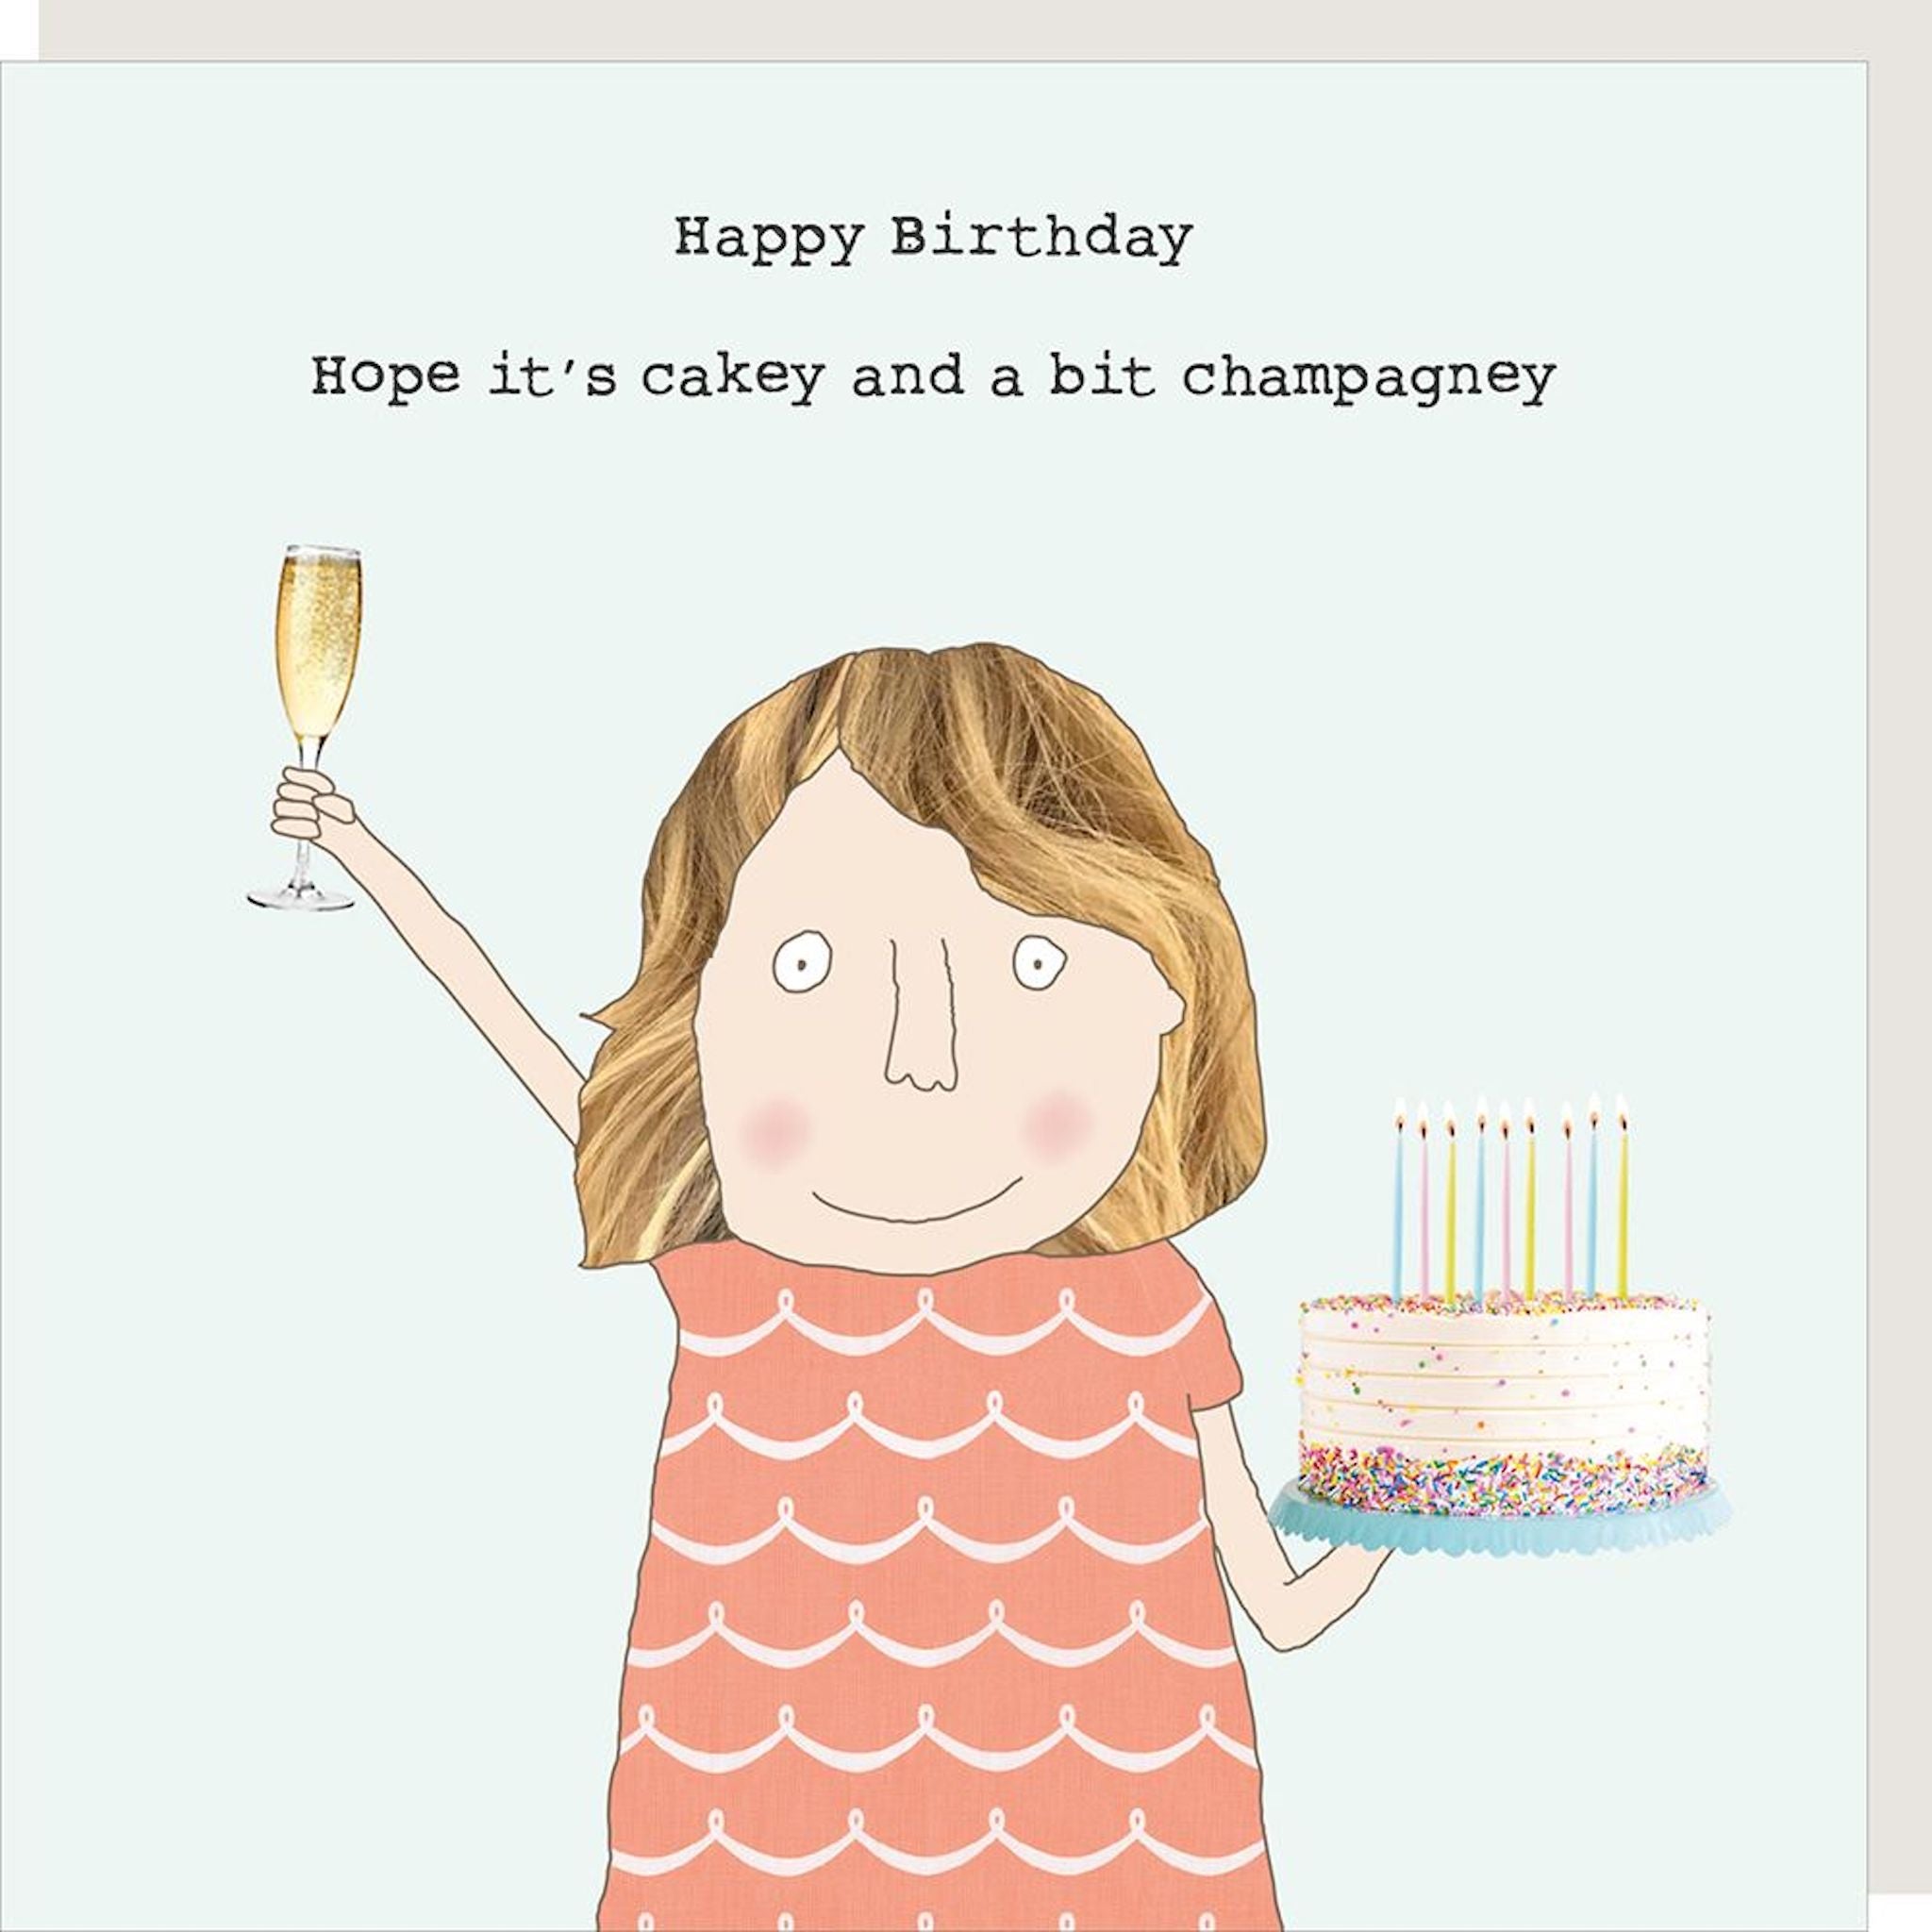 Happy Birthday Hope its cakey and a bit champagney